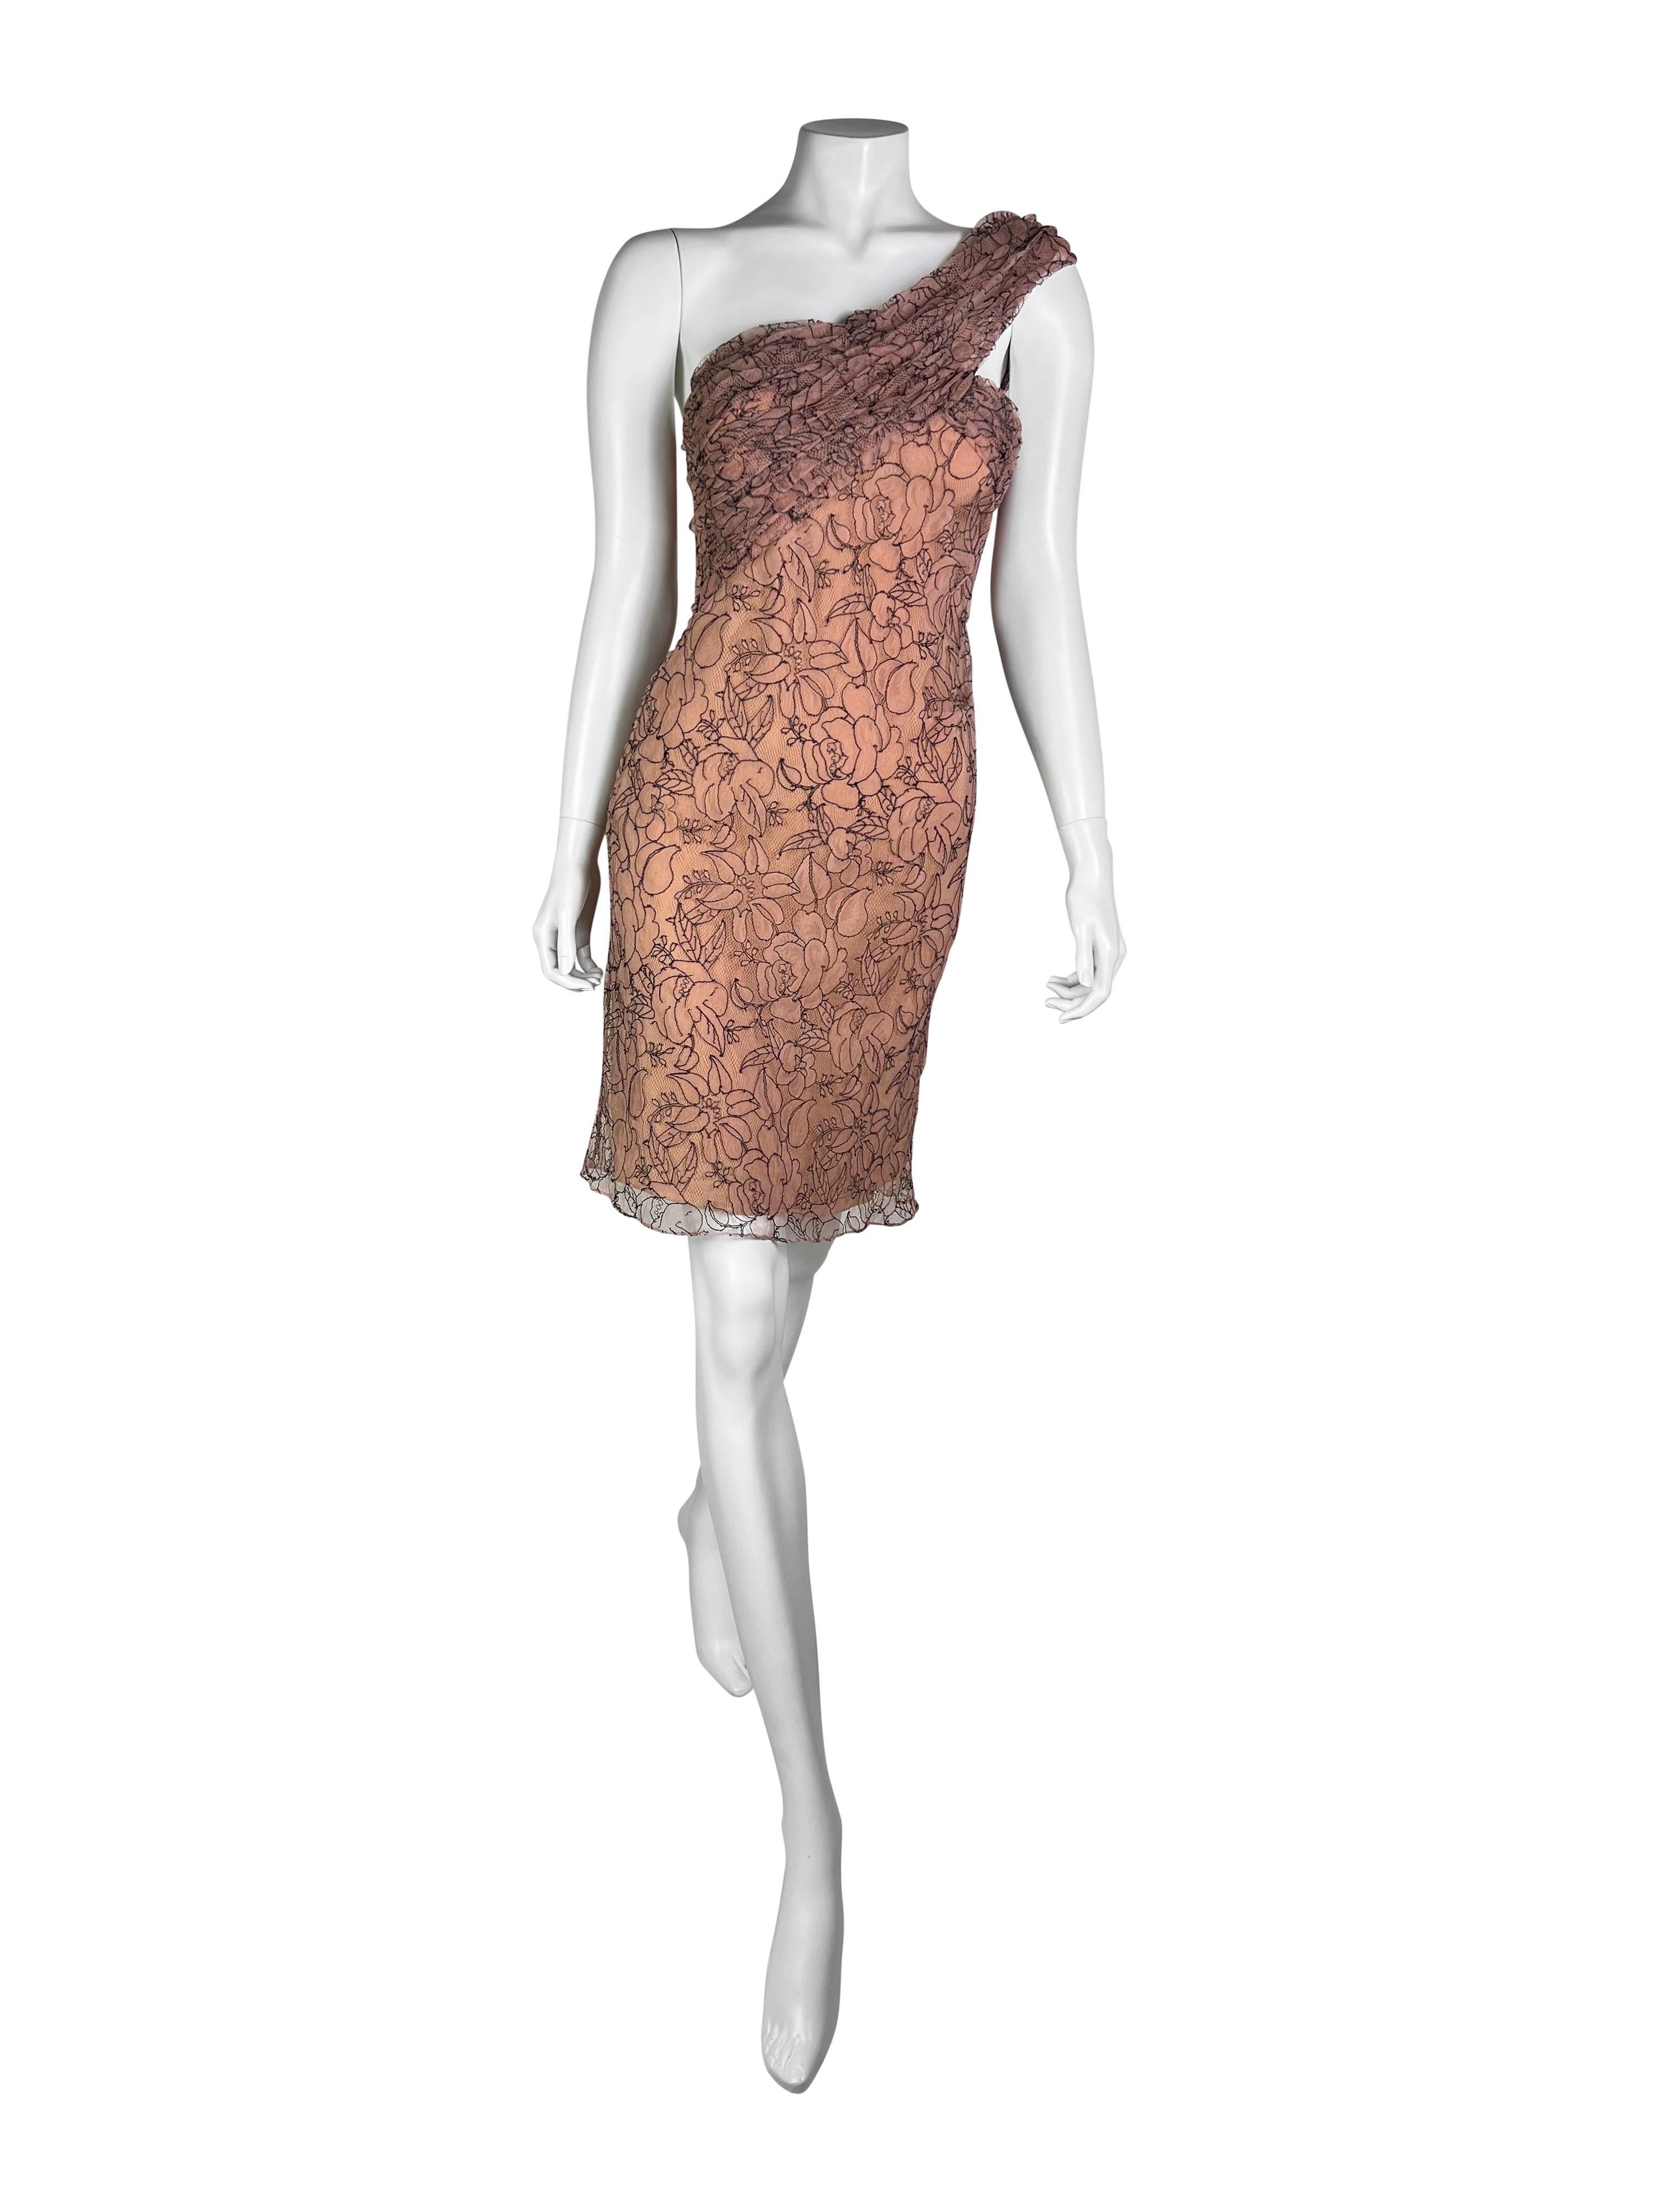 Brown SS 2006 Dior by John Galliano Lace Mini Dress For Sale